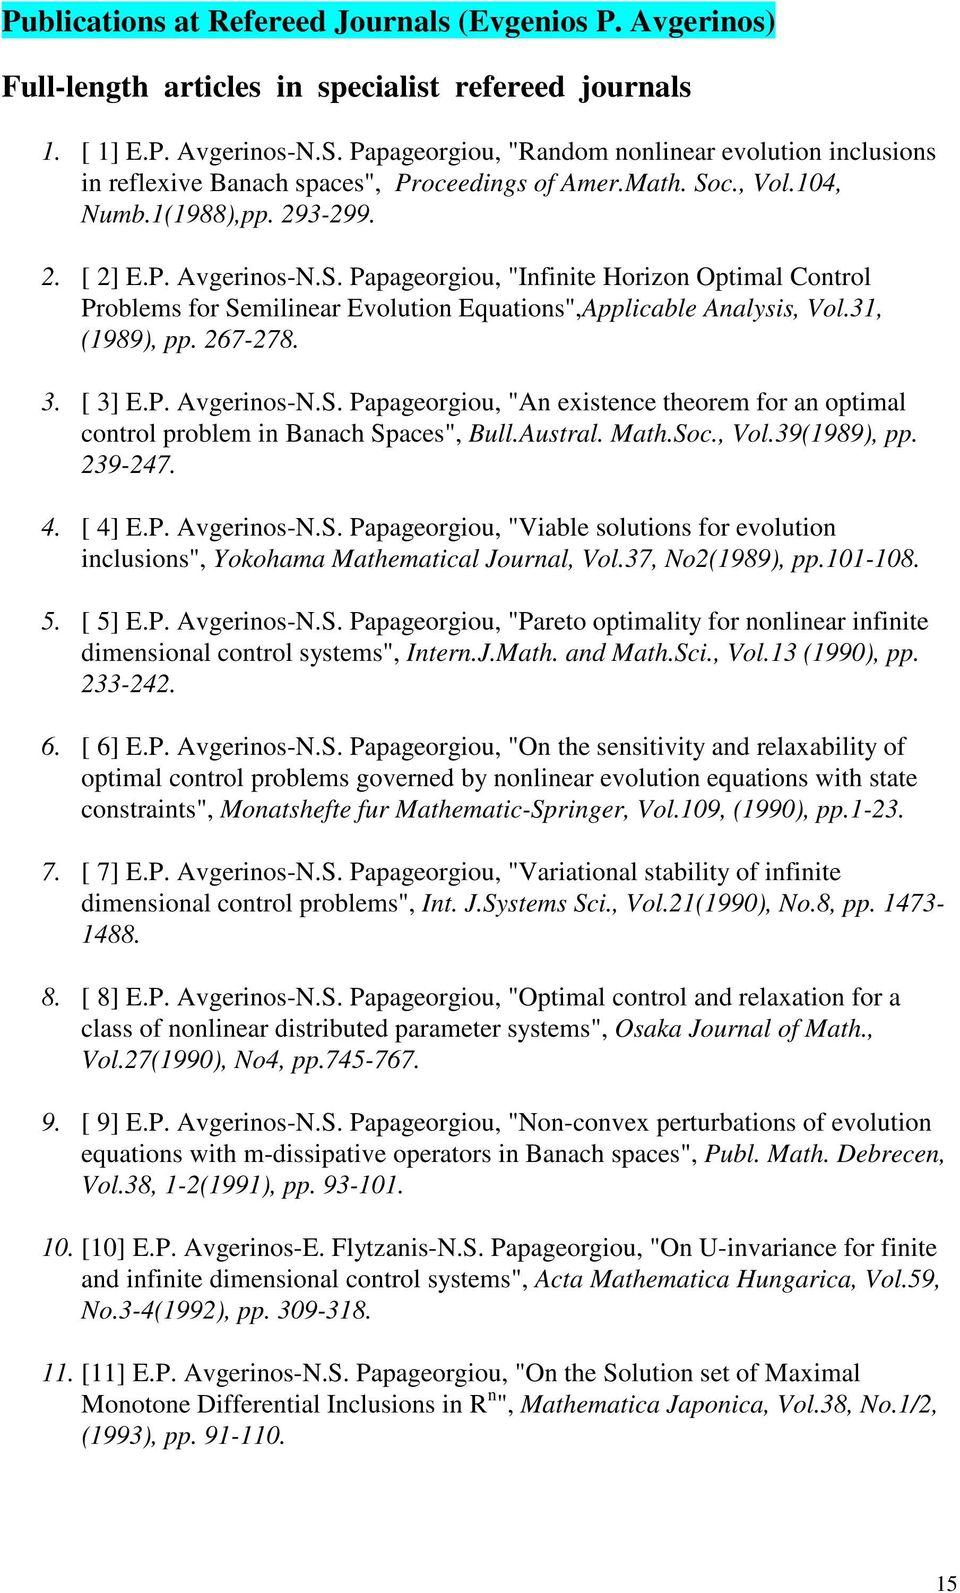 c., Vol.104, Numb.1(1988),pp. 293-299. 2. [ 2] E.P. Avgerinos-N.S. Papageorgiou, "Infinite Horizon Optimal Control Problems for Semilinear Evolution Equations",Applicable Analysis, Vol.31, (1989), pp.